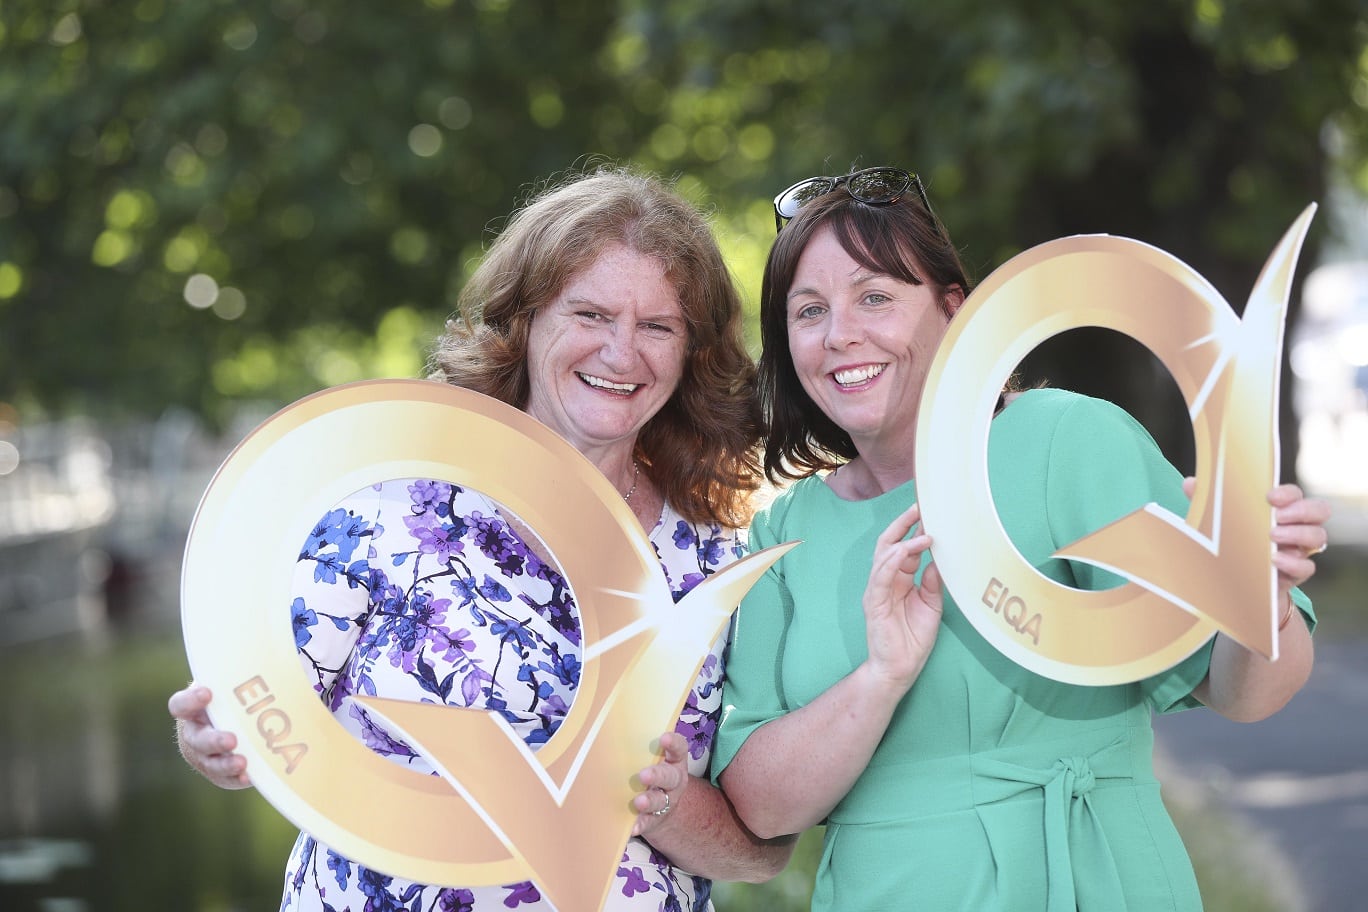 National Q Mark Awards celebrates 50 years with two new categories